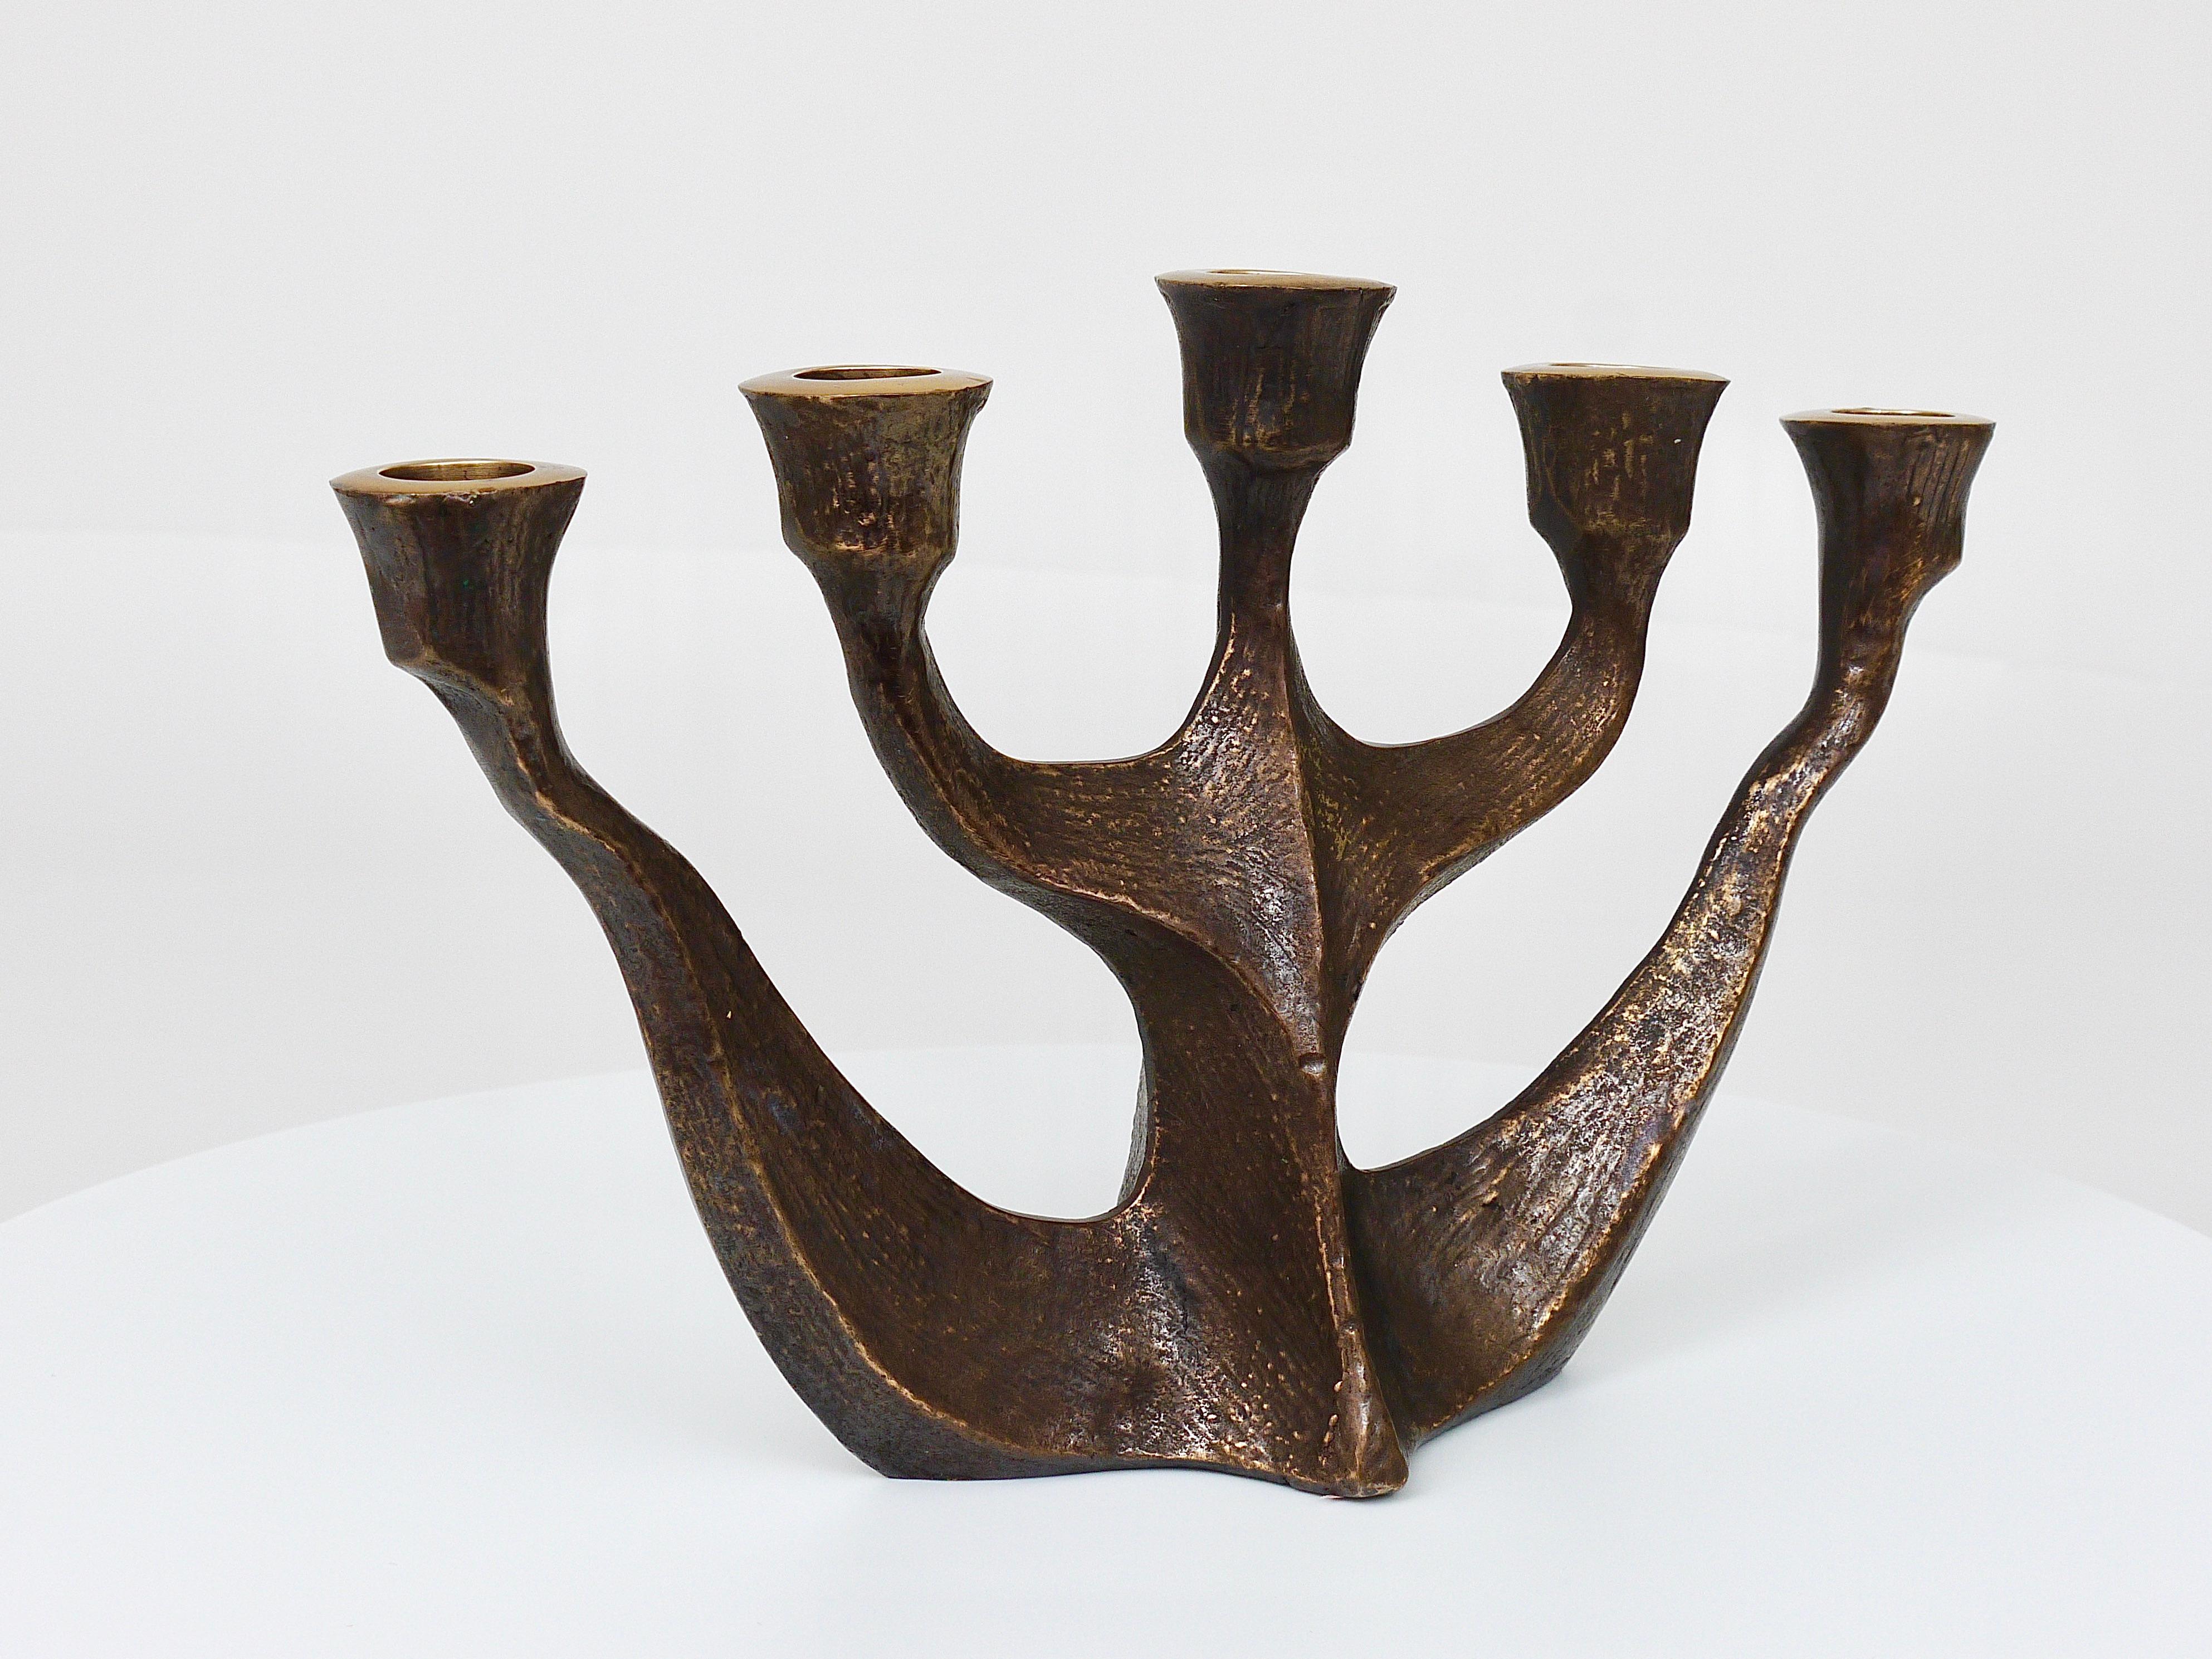 Up to Two Midcentury Brutalist Bronze Candleholders by Michael Harjes, 1960s For Sale 2